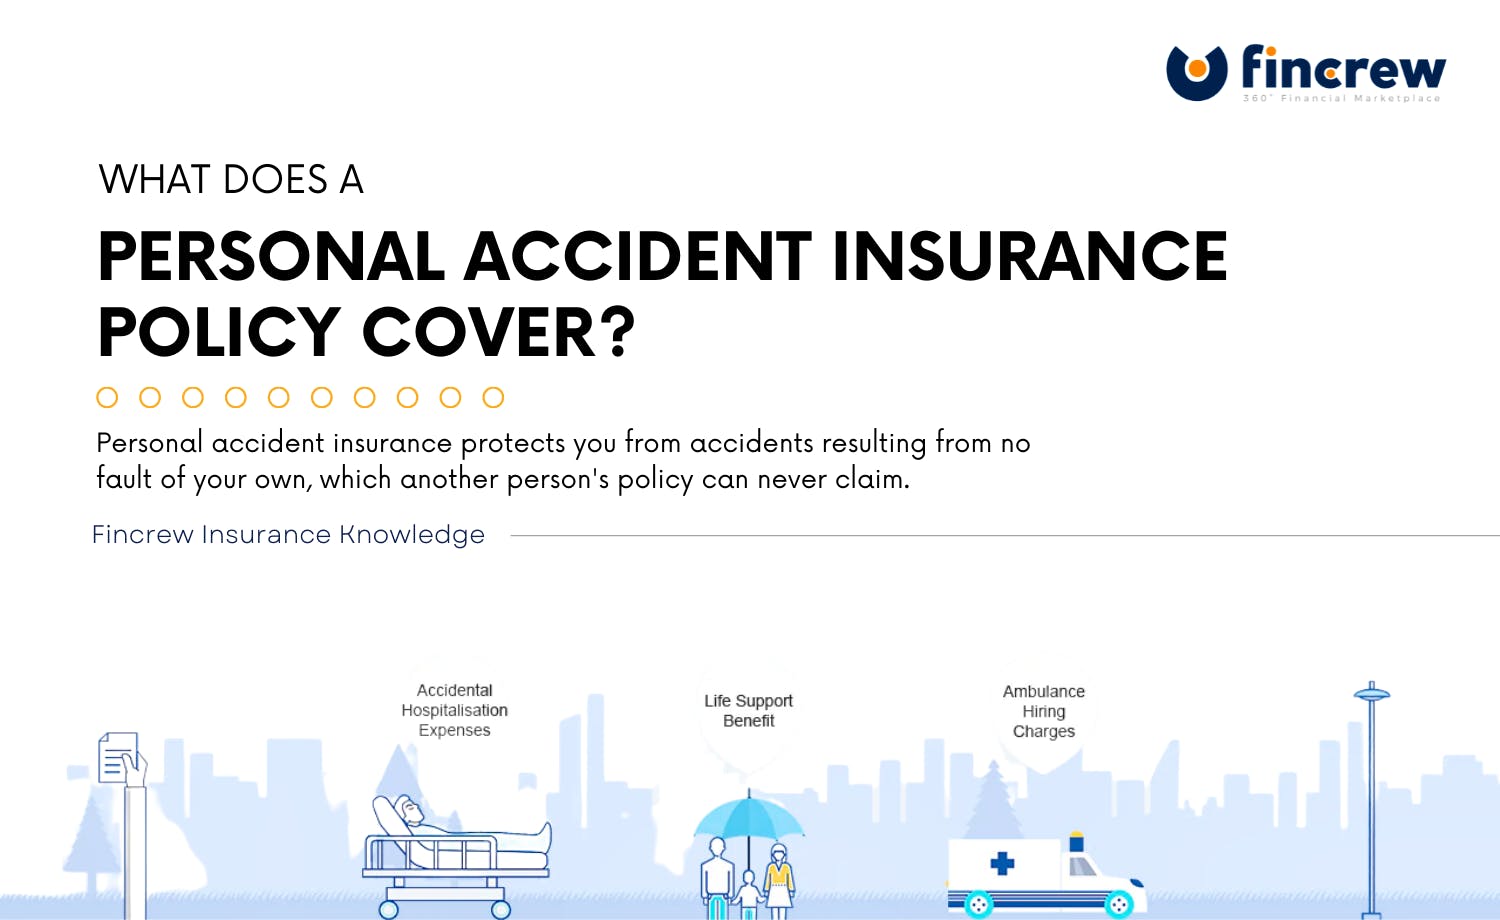 What Does a Personal Accident Insurance Policy Cover